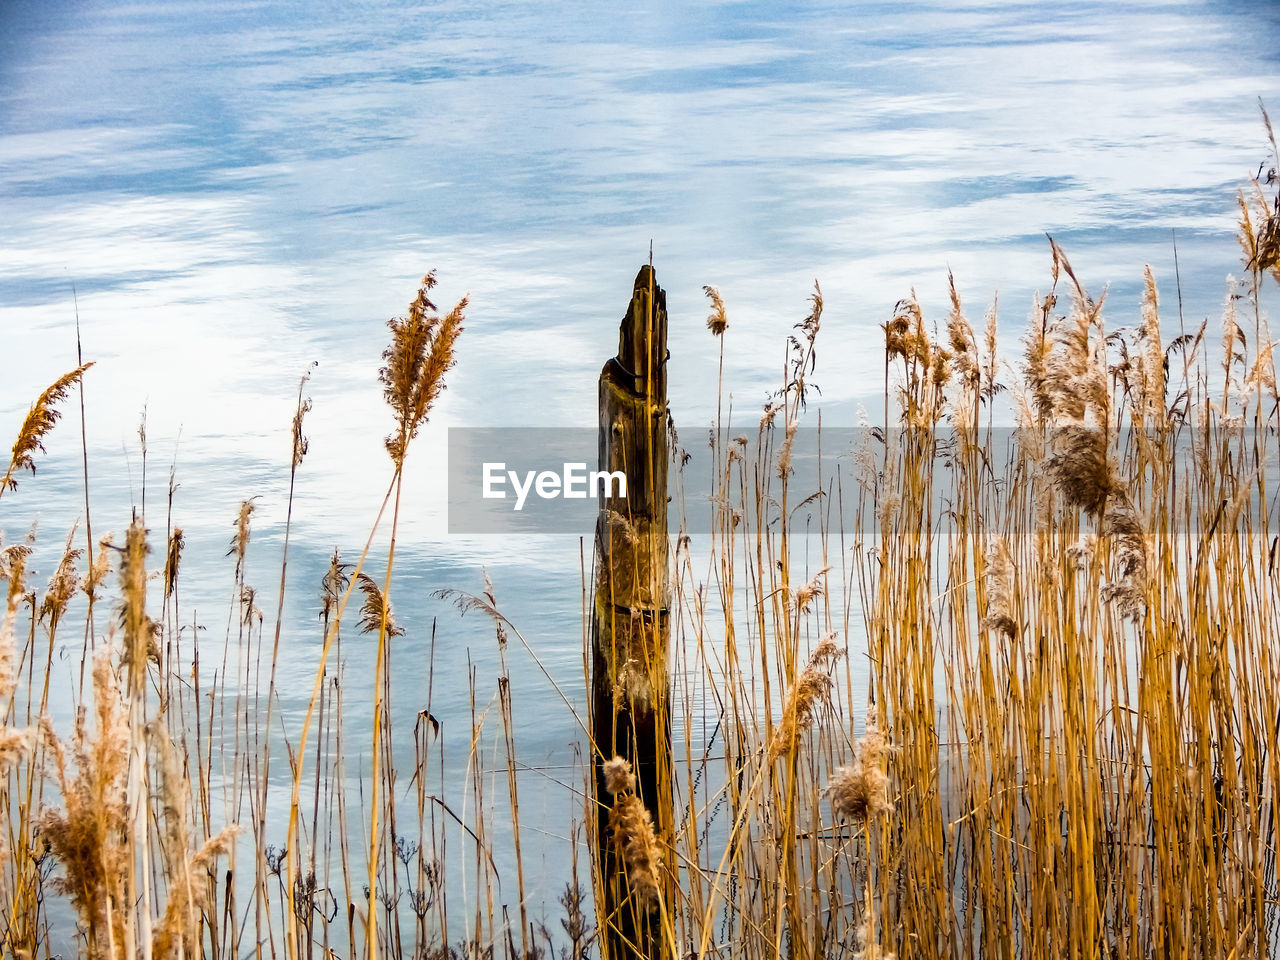 Close-up of dry grass by lake against sky